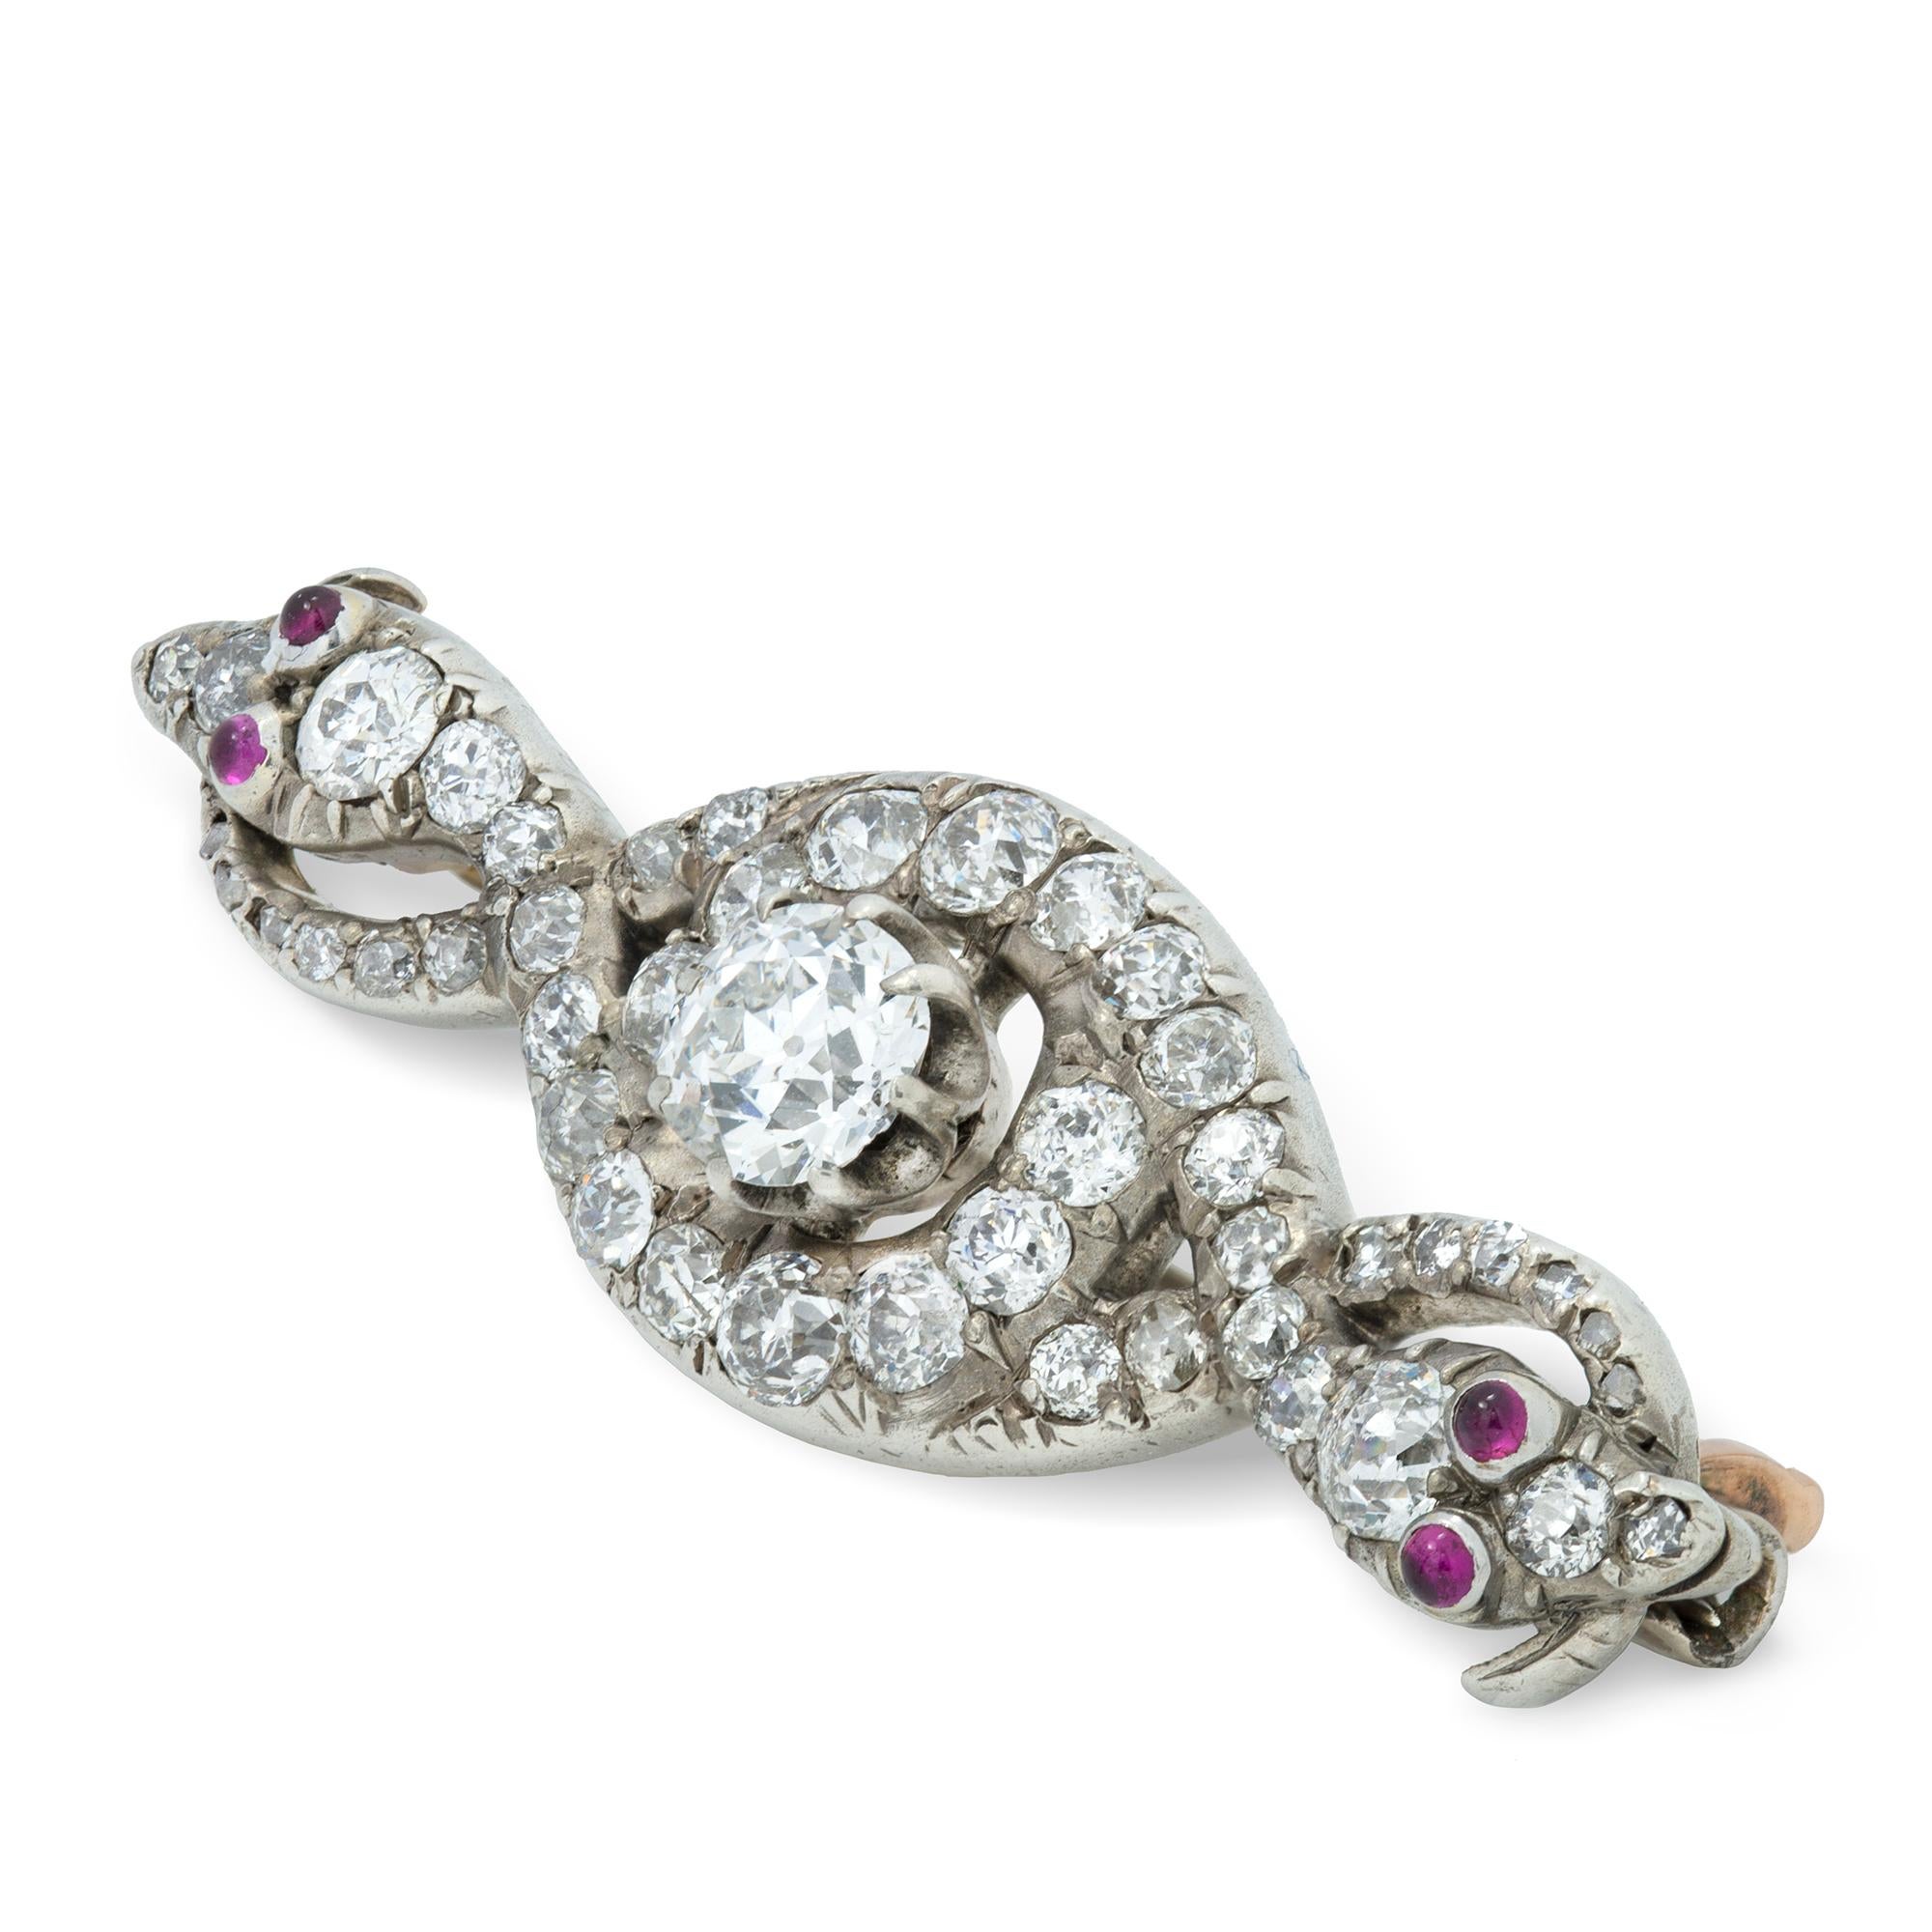 A Victorian diamond double serpent brooch, the central old European-cut diamond weighing approximately 0.55 carat, surrounded by two entwinned serpents curled in a figure-of-eight design, the bodies and snouts encrusted with old brilliant-cut